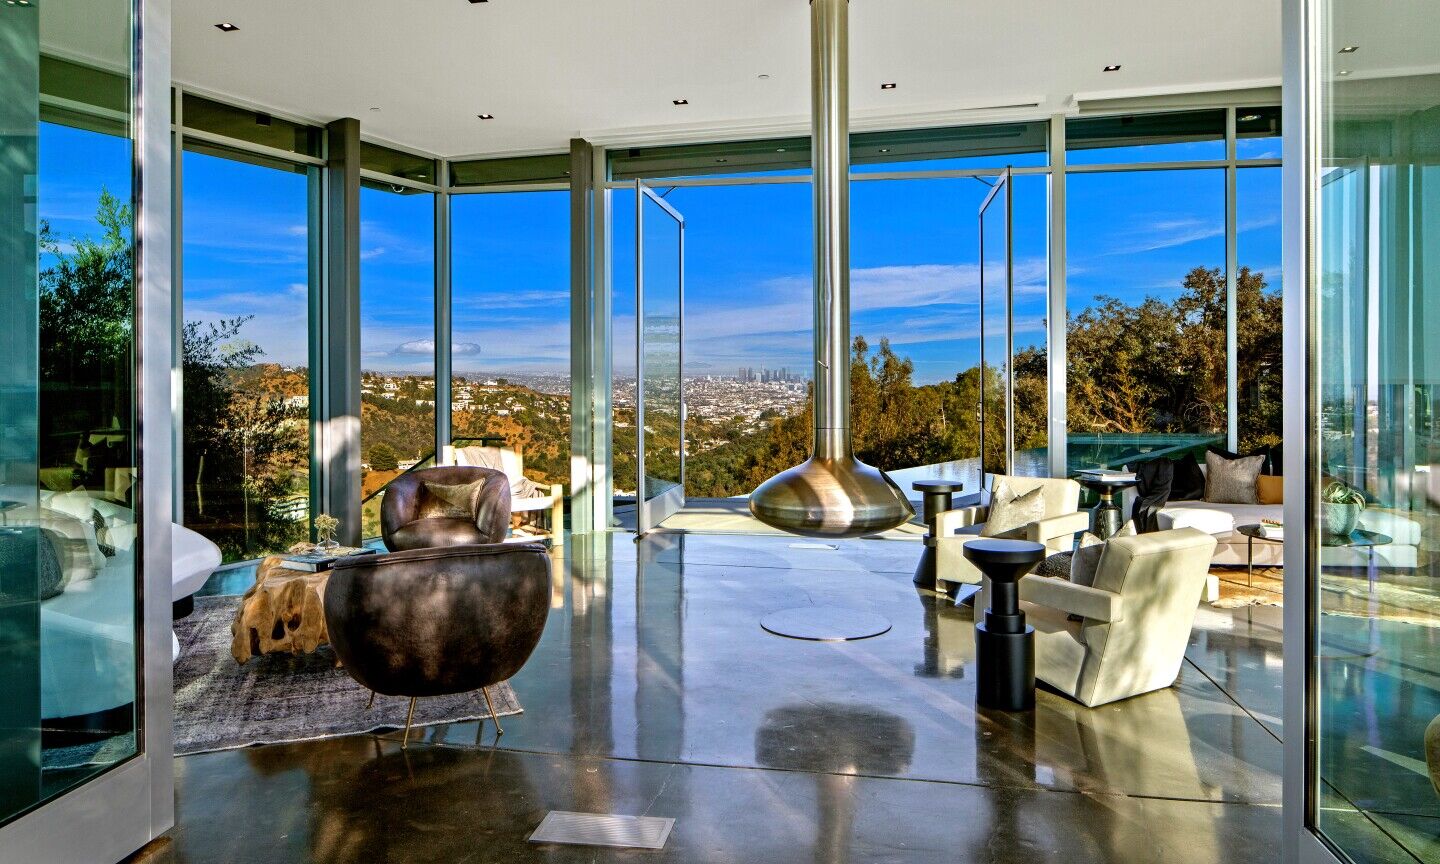 The living room has glass walls, a shiny floor and furniture overlooking greenery and sky.